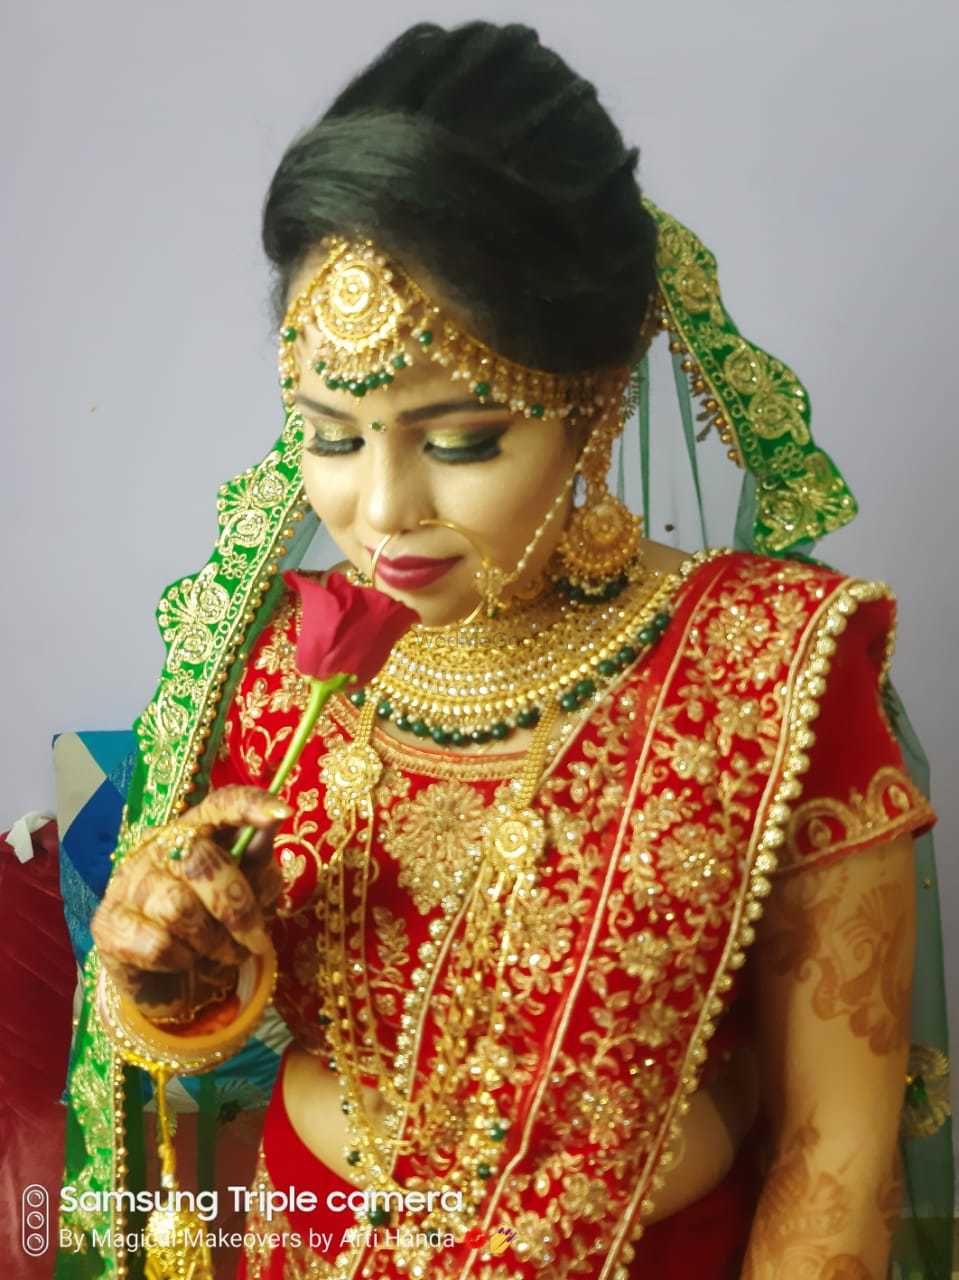 Photo From Bhavana - By Magical Makeovers By Arti Handa